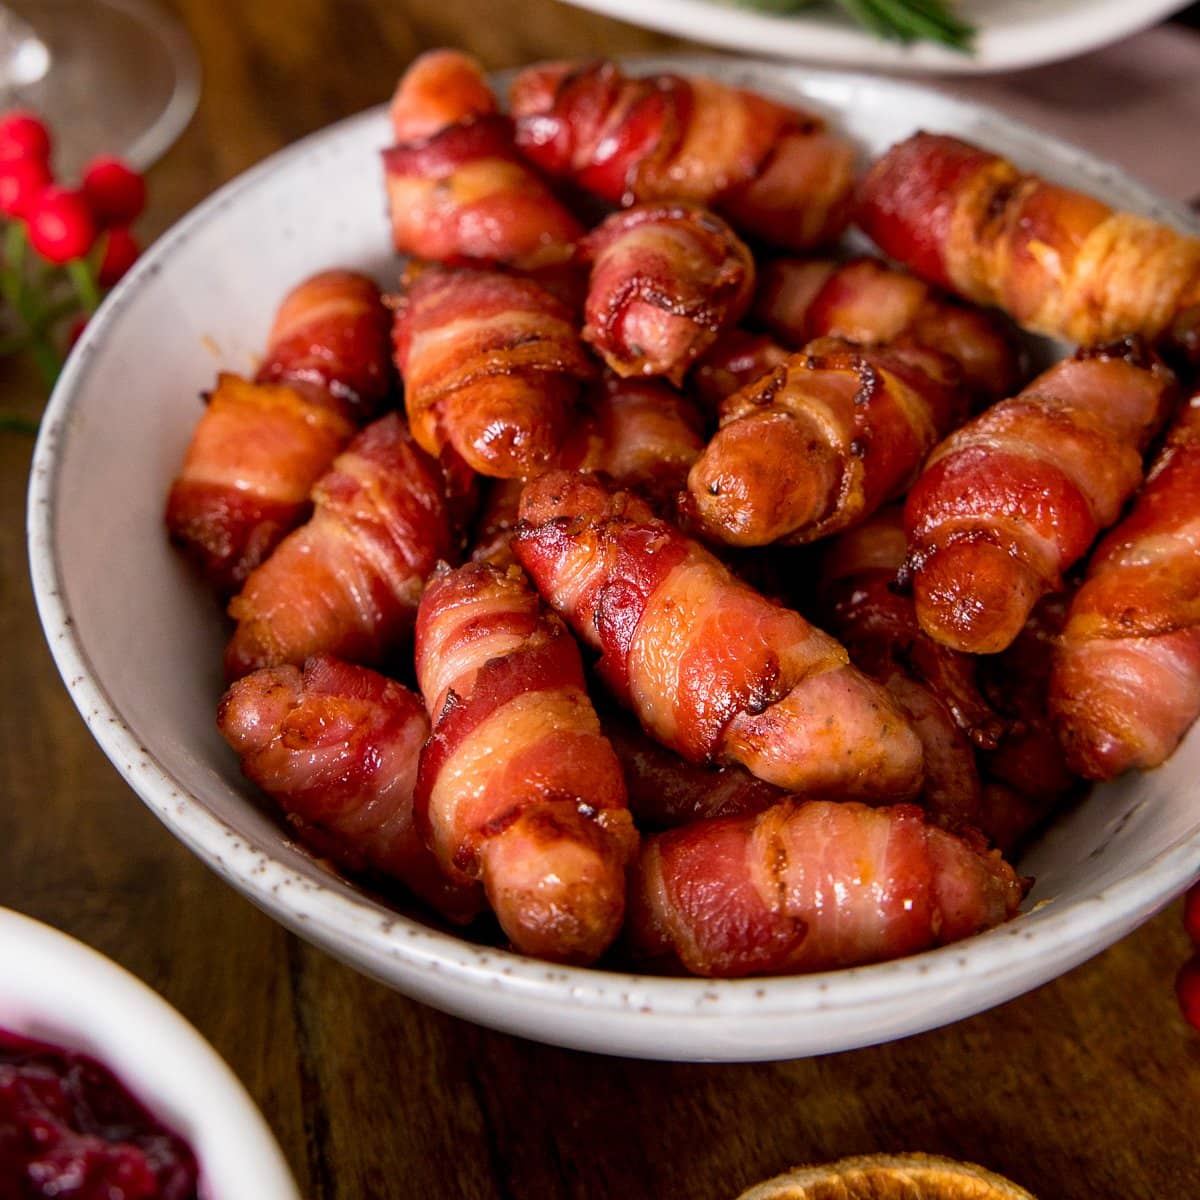 Sausages wrapped in bacon in a white bowl